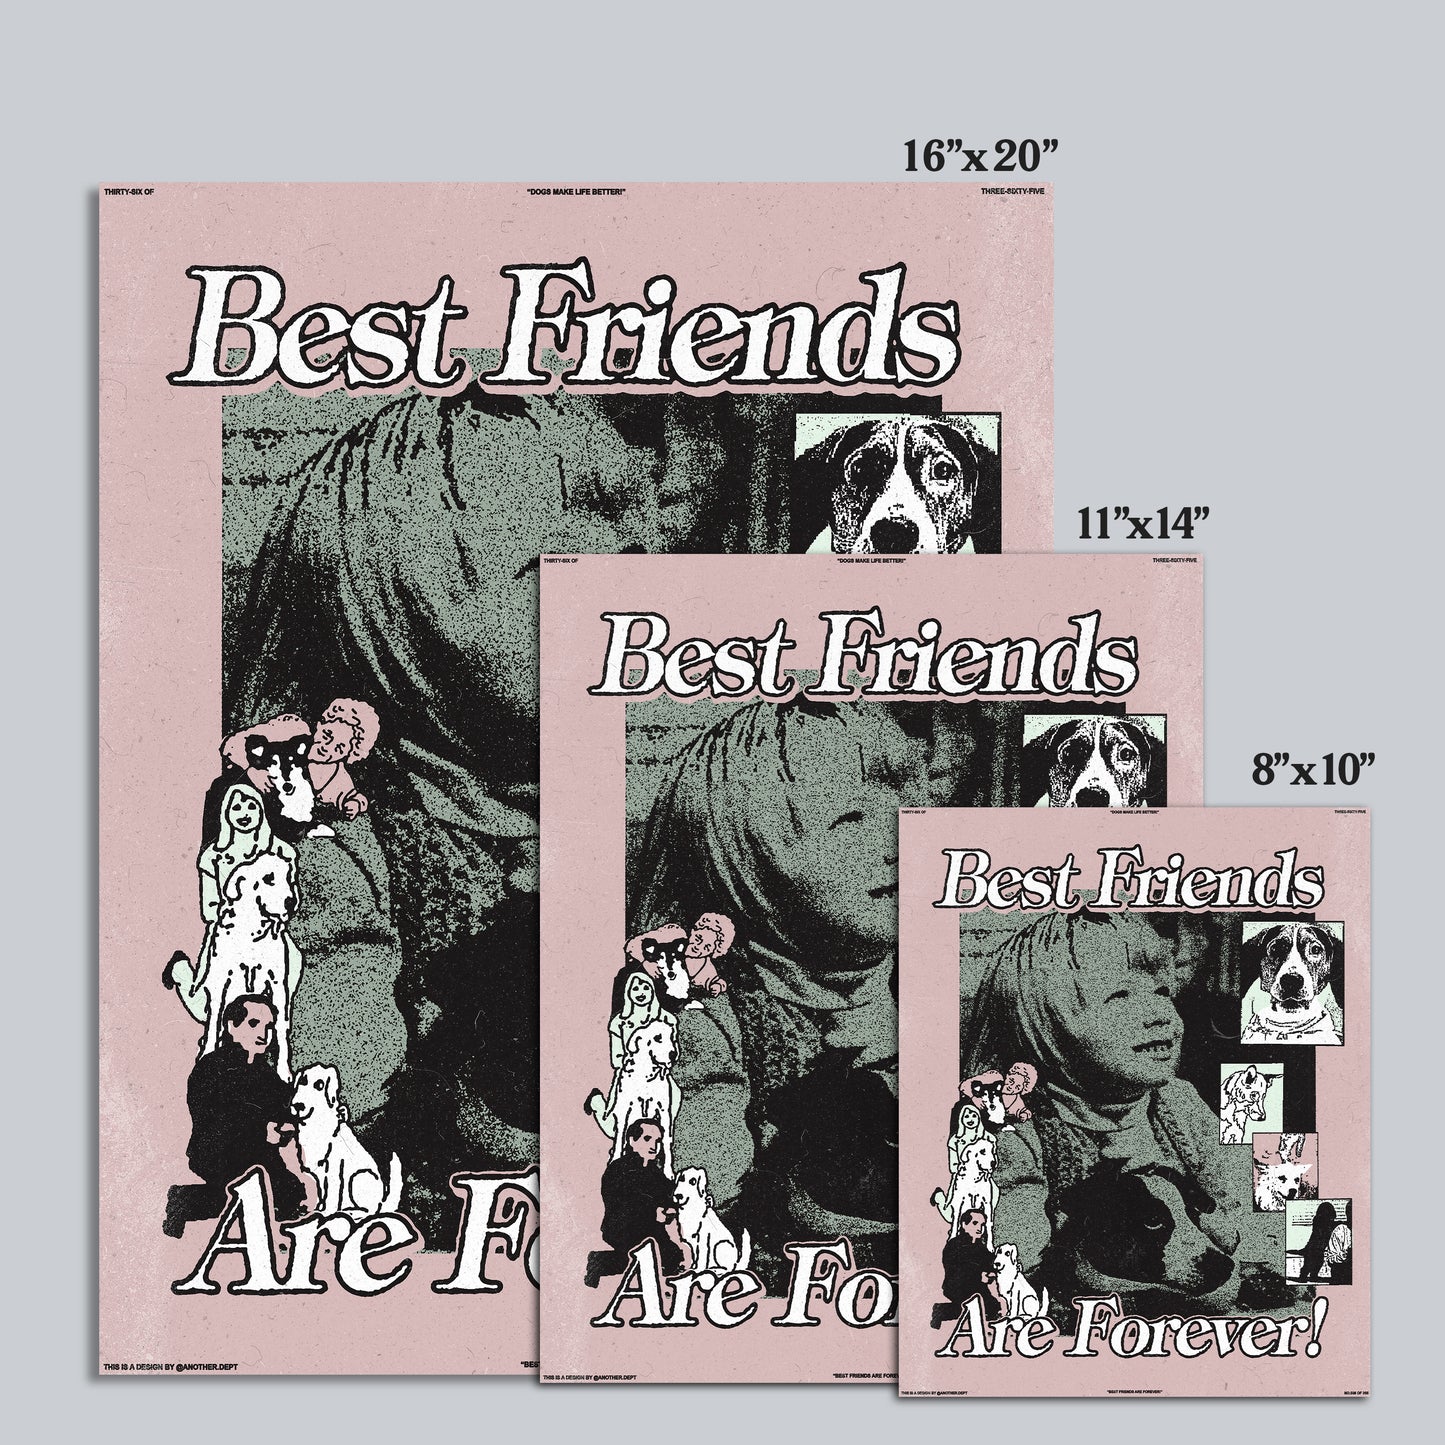 036 - Best Friends are Forever